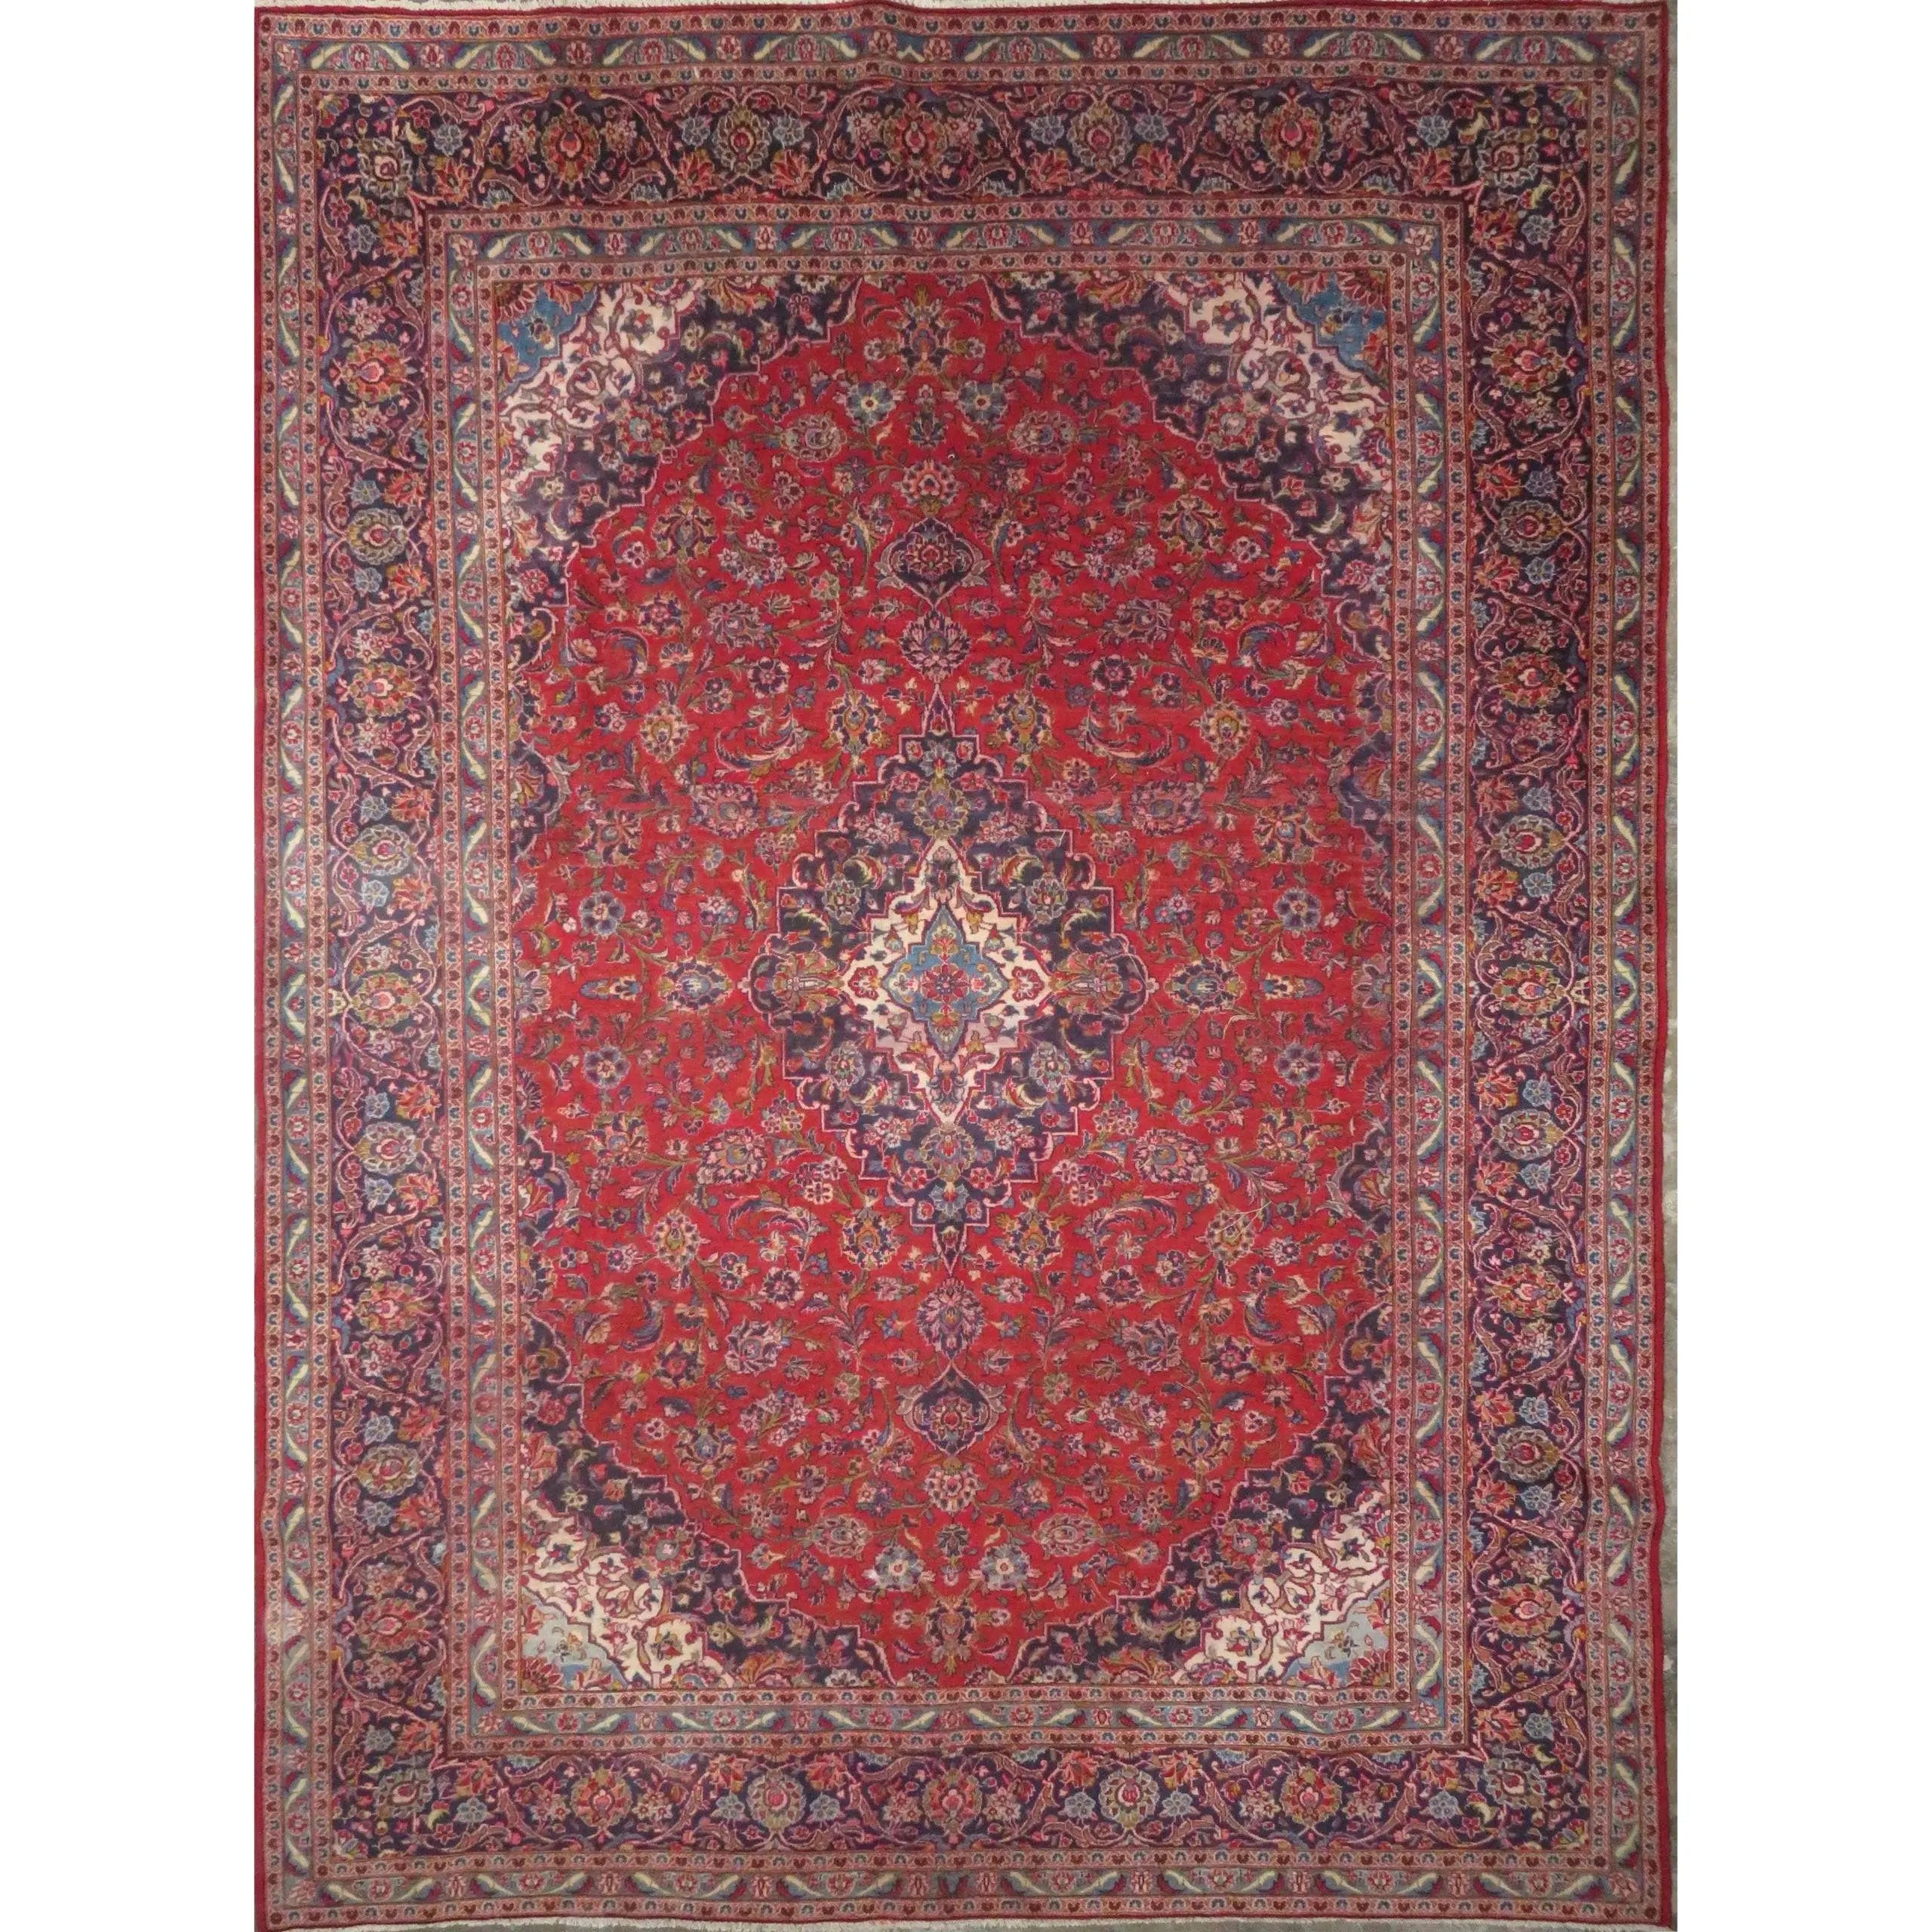 Hand-Knotted Persian Wool Rug _ Luxurious Vintage Design, 13'1" x 9'4", Artisan Crafted